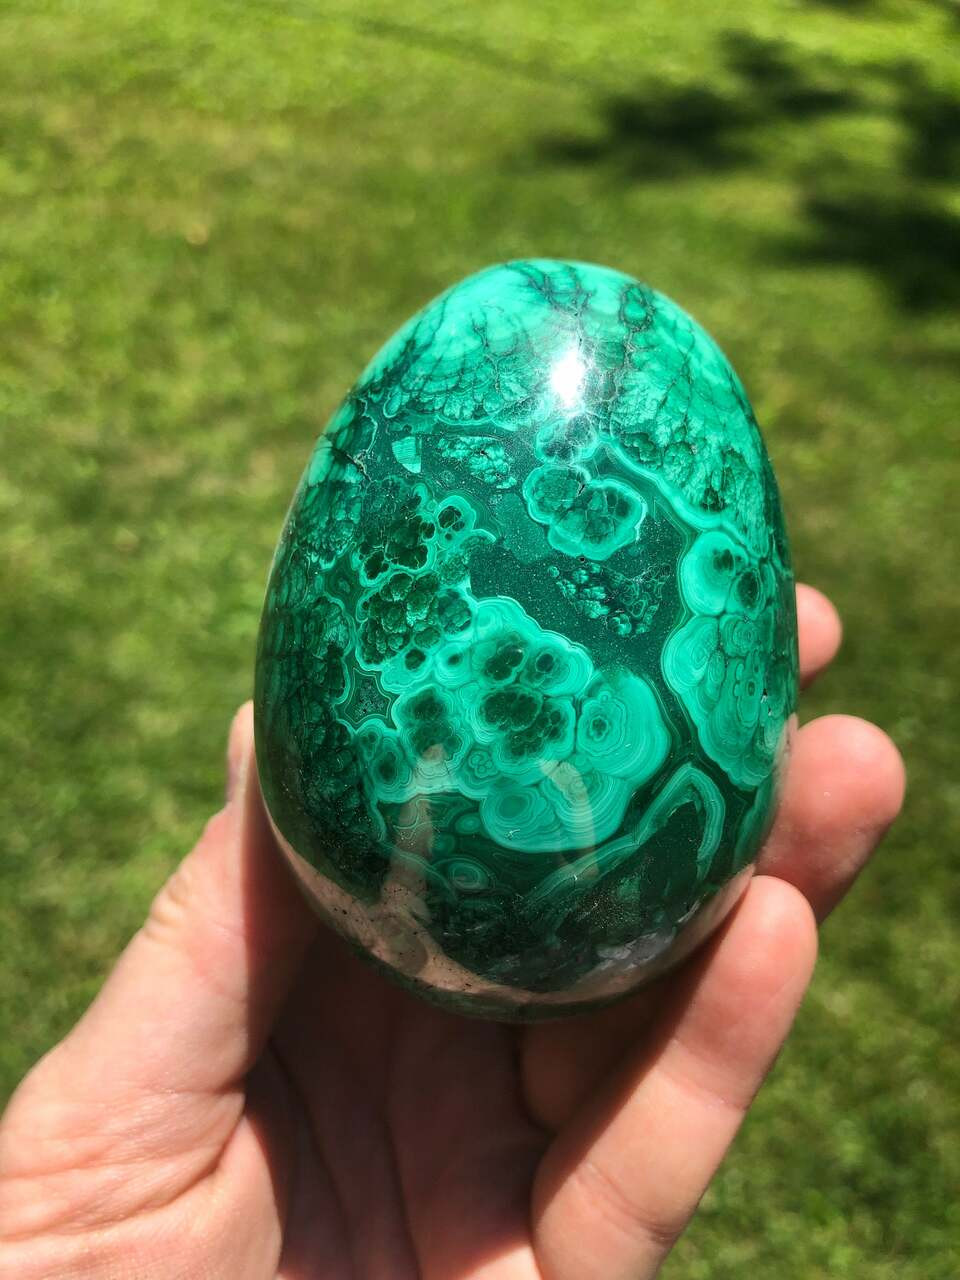 Details about   AA Polished Egg with Chrysocolla and Malachite from Peru  3.9 cm  # 11231 